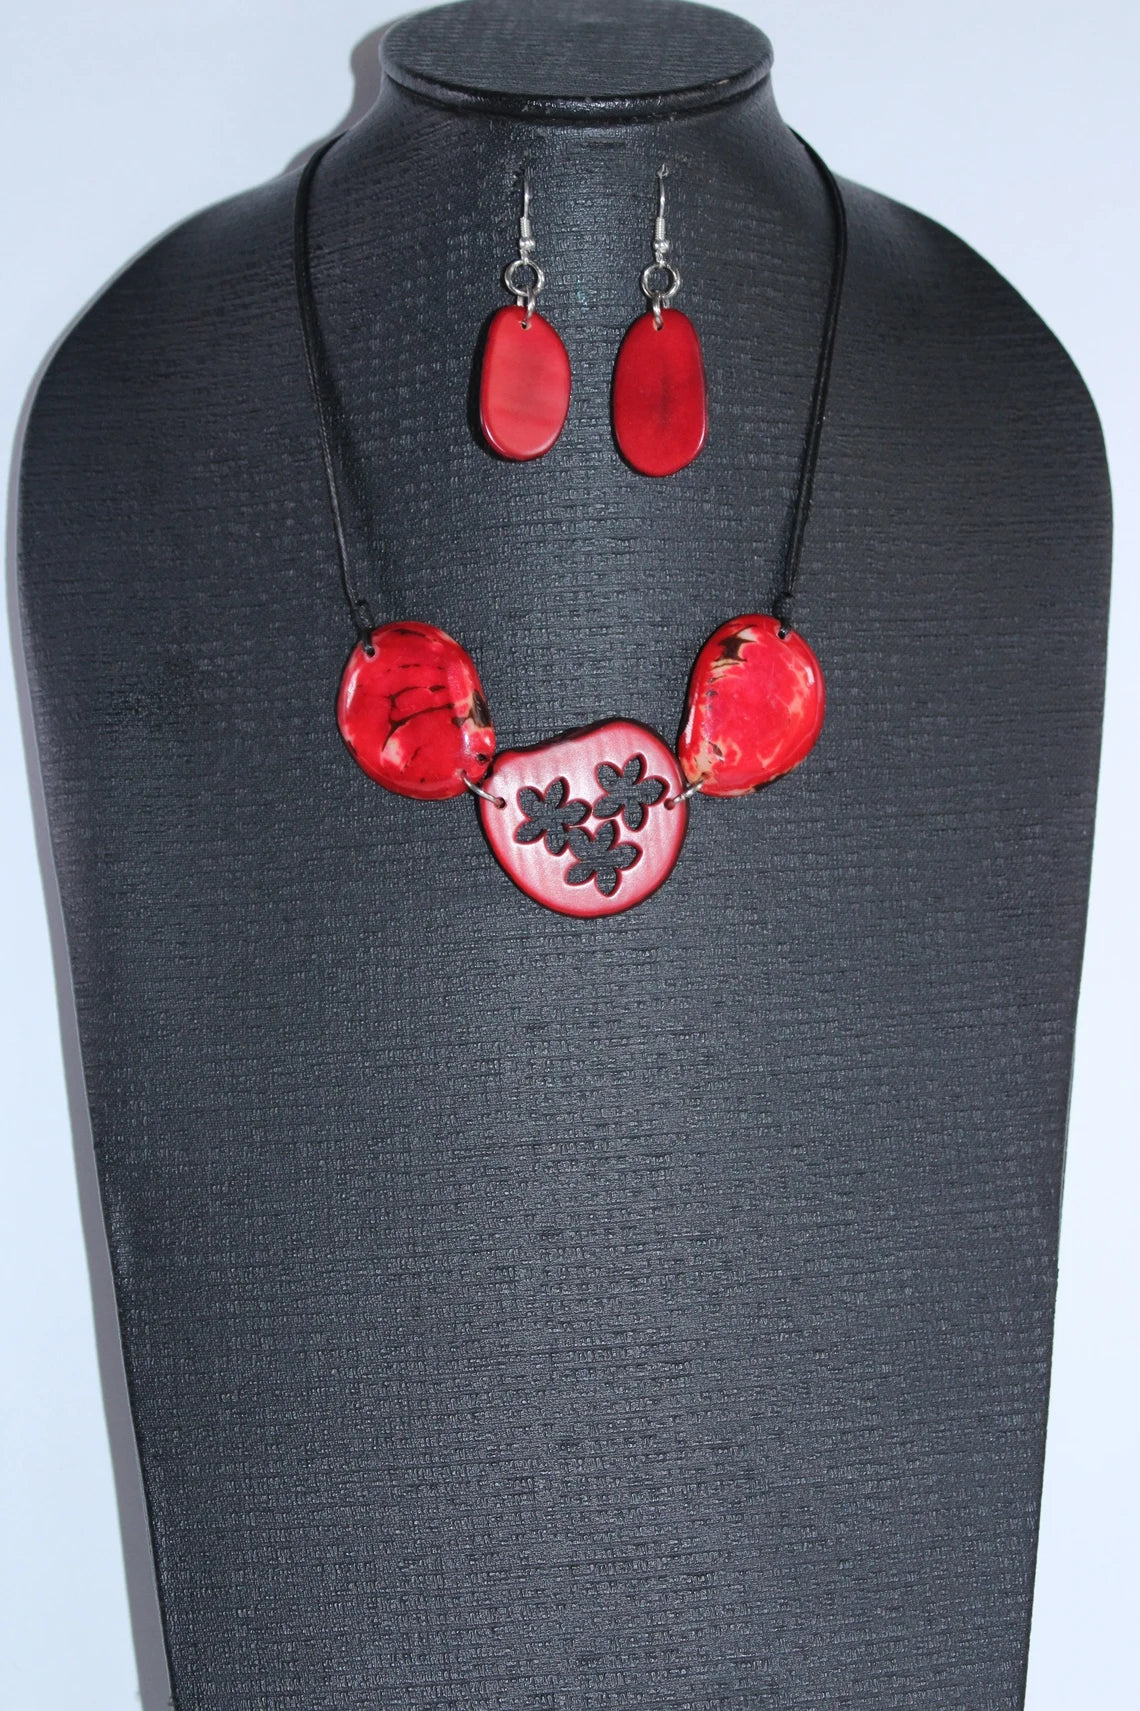 Tagua Pendant Necklace and Earrings Flower Cut Set in Red Color